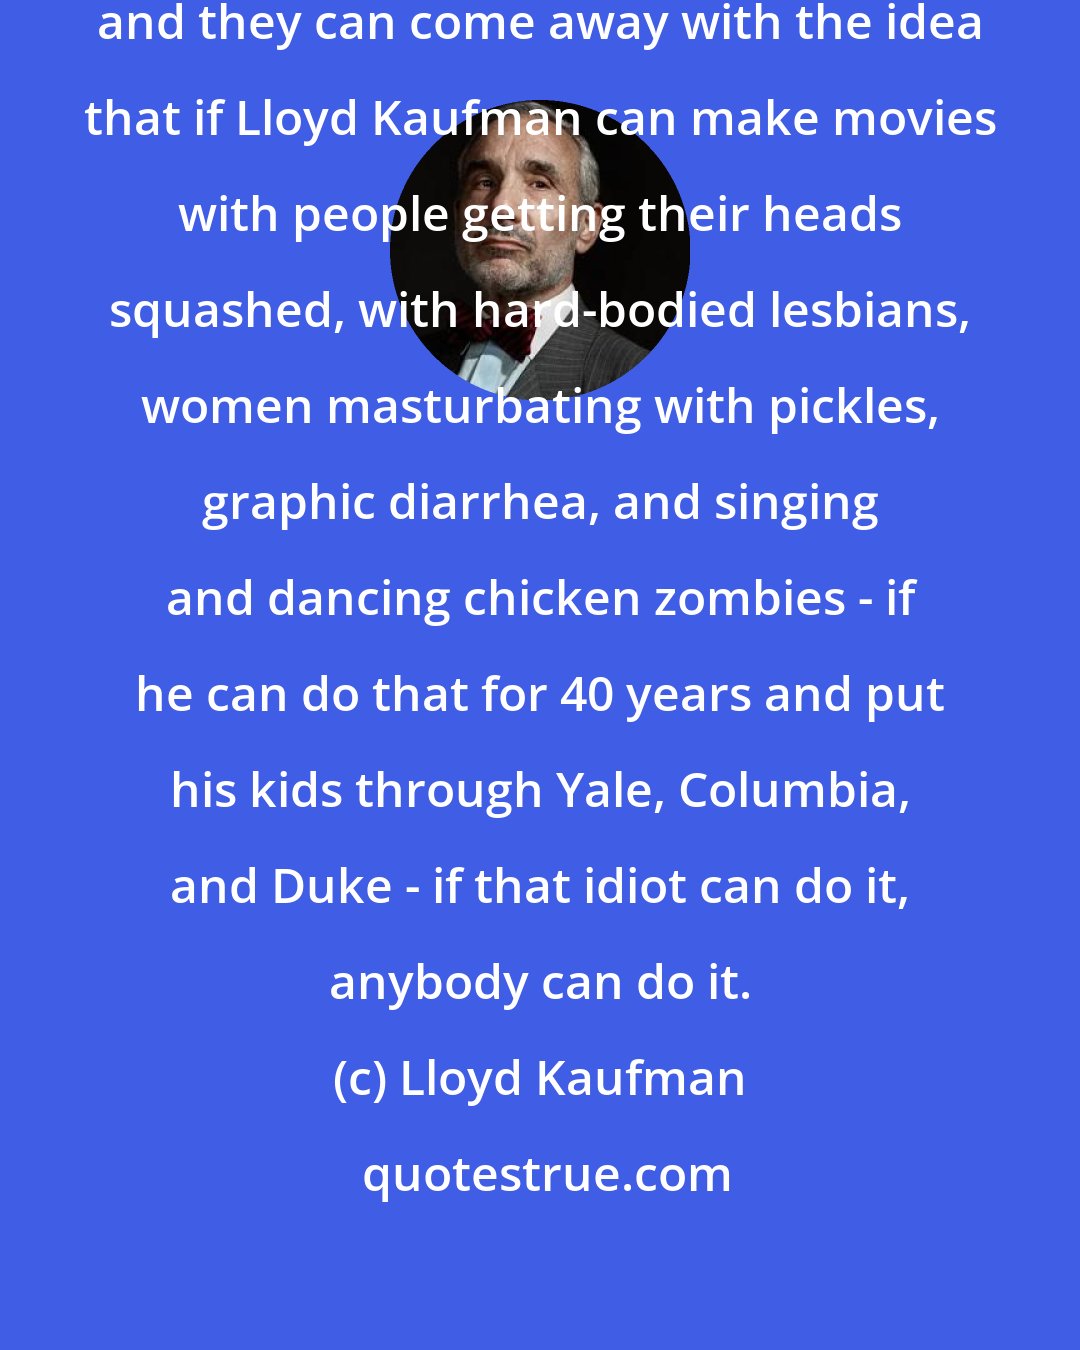 Lloyd Kaufman: It's a lonely world, being independent, and they can come away with the idea that if Lloyd Kaufman can make movies with people getting their heads squashed, with hard-bodied lesbians, women masturbating with pickles, graphic diarrhea, and singing and dancing chicken zombies - if he can do that for 40 years and put his kids through Yale, Columbia, and Duke - if that idiot can do it, anybody can do it.